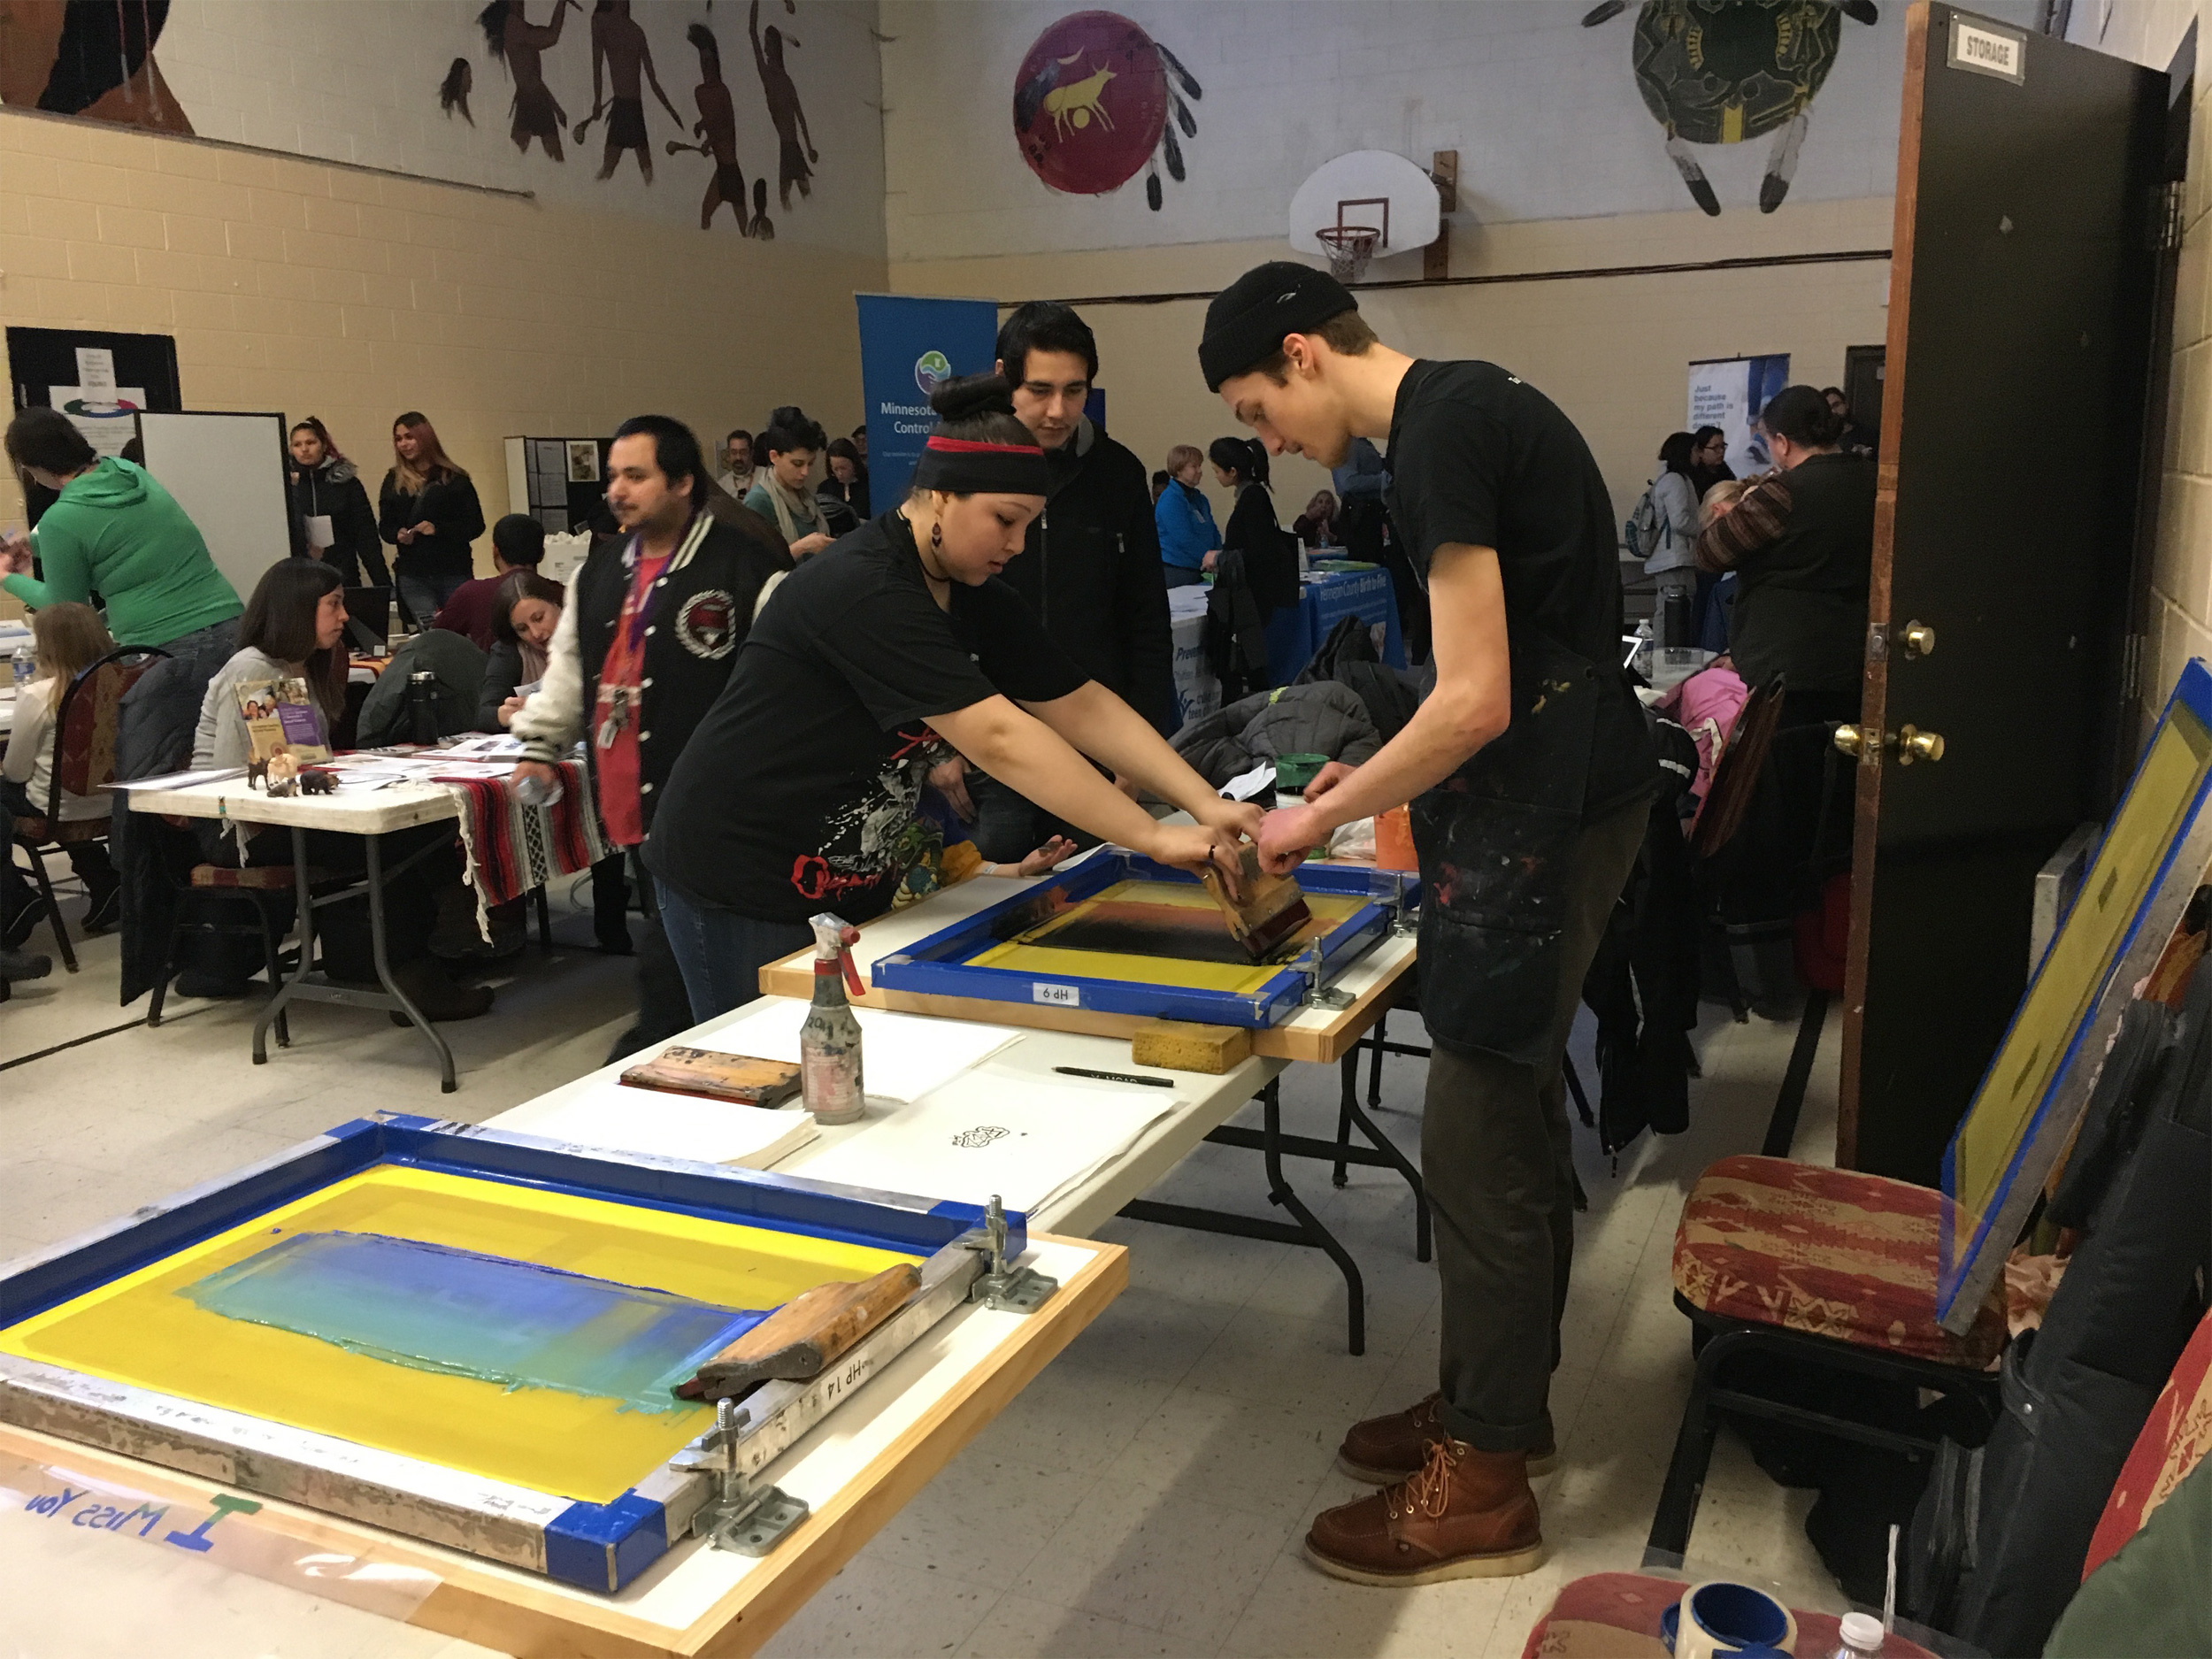 Screenprinting at Little Earth student choice day